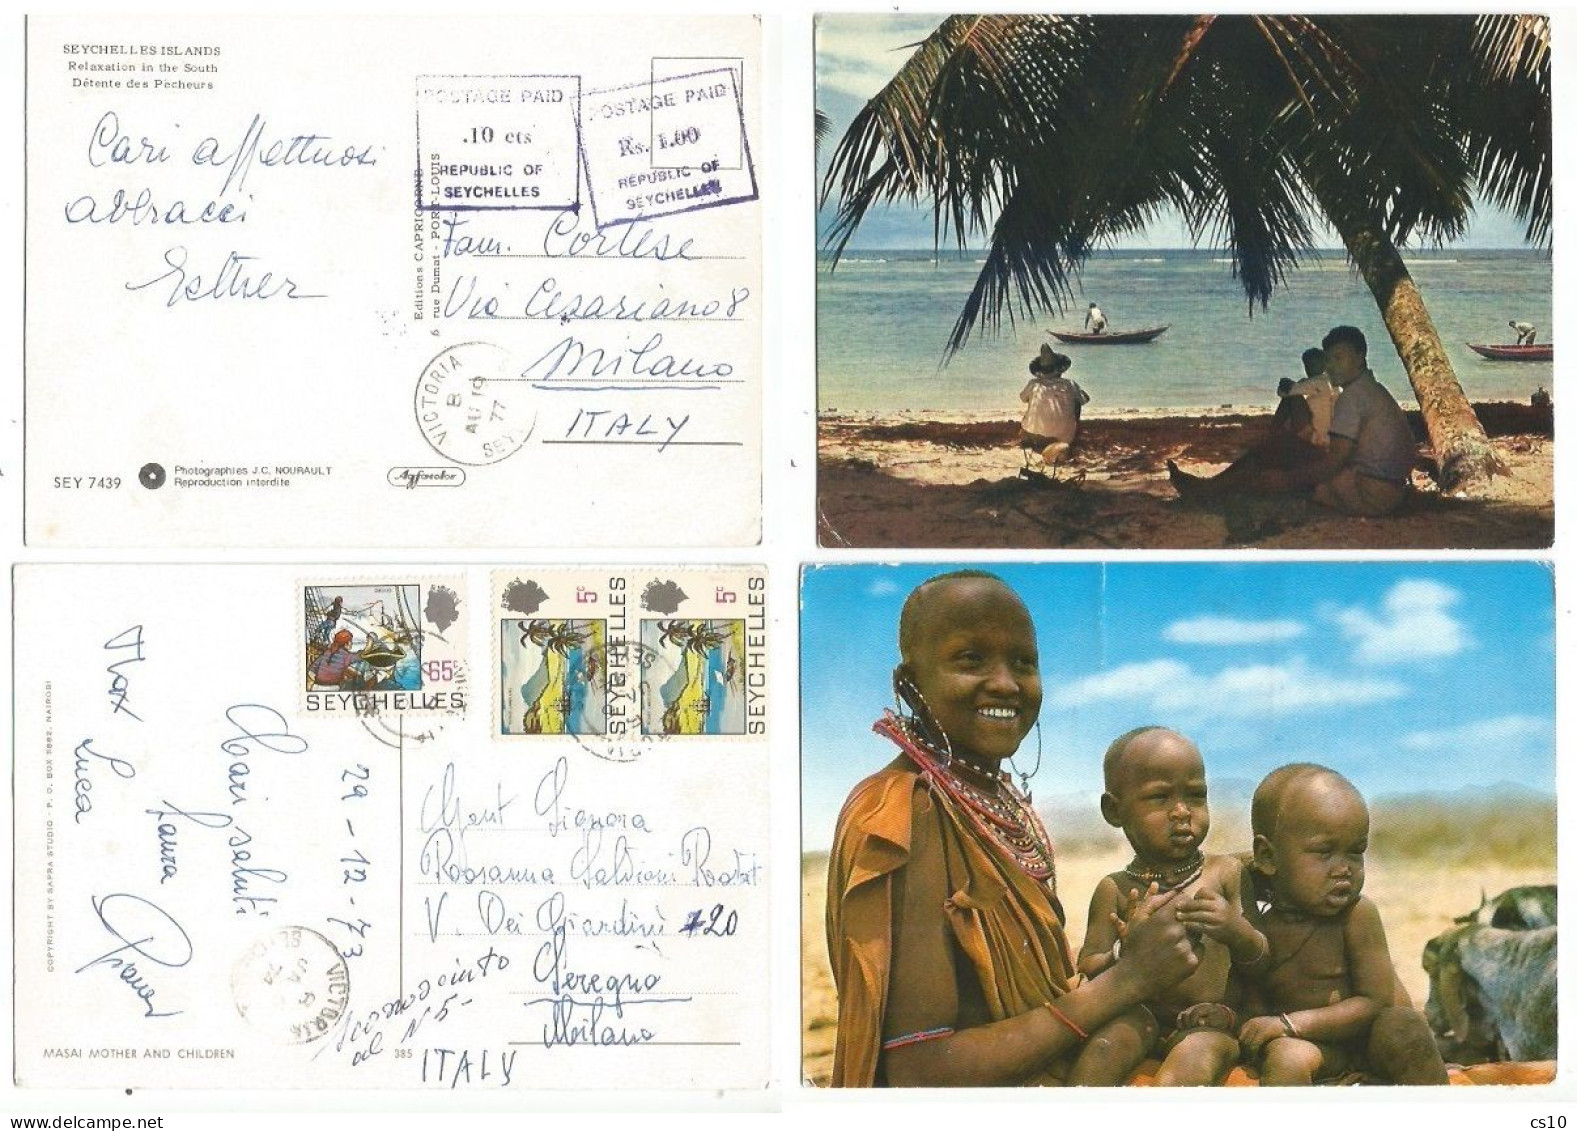 Seychelles Isl. #2 Pcard To Europe : 1977 Postage Paid Violet 2x PMK Rate Rs.1.10 / 1973 Masai Family 3 Stamps - Seychelles (1976-...)